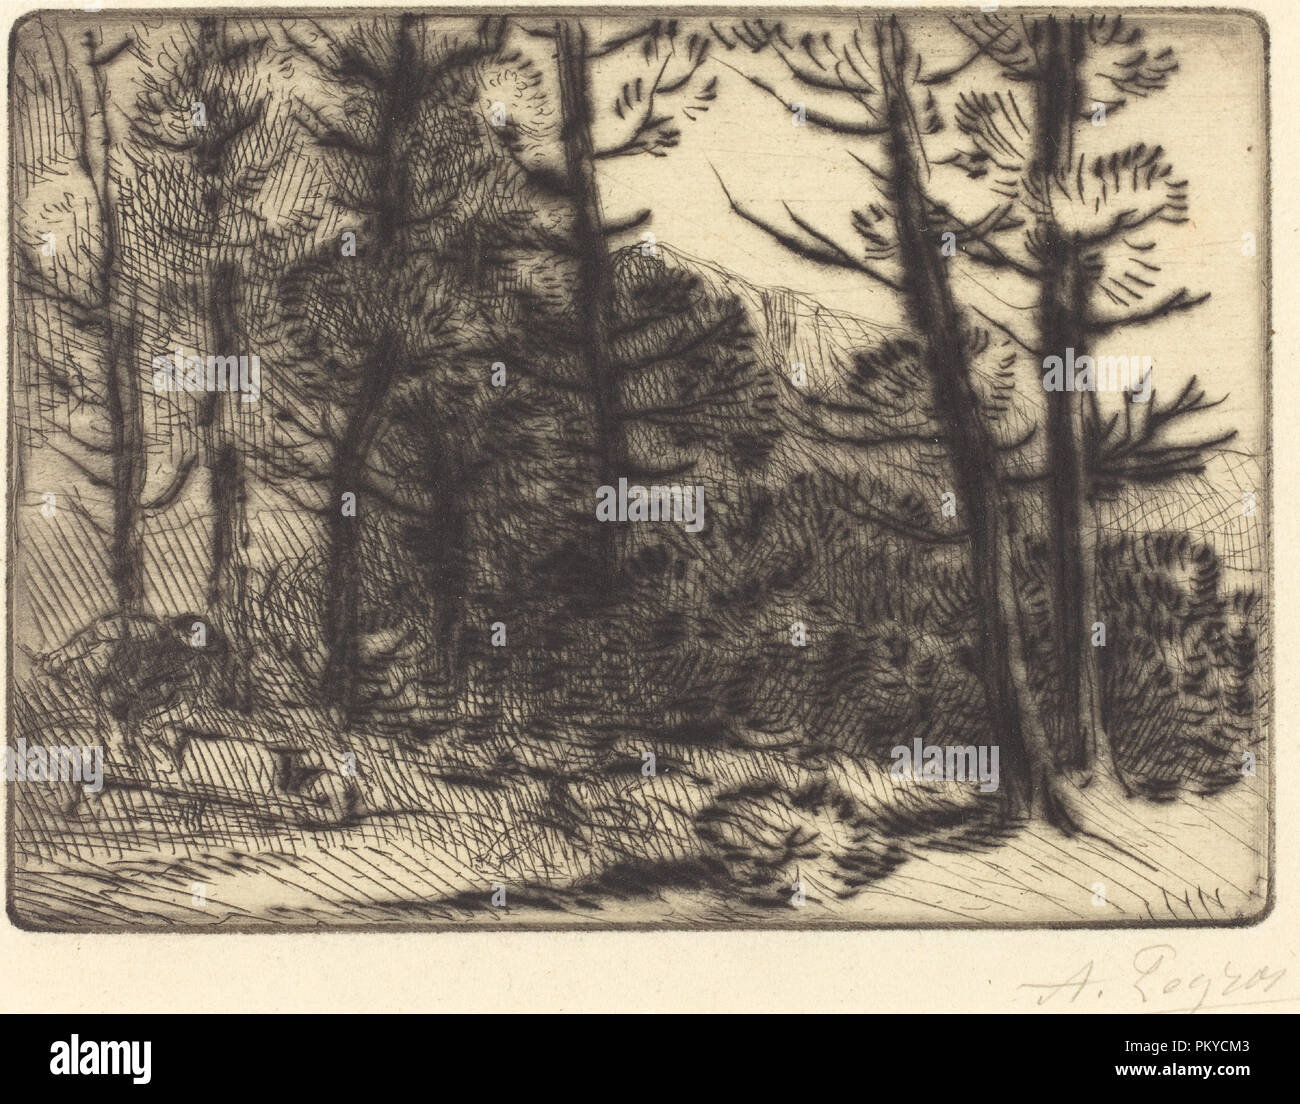 Woods in Winter Sun, 2nd plate (Soleil d'hiver dans les bois). Medium: drypoint and etching?. Museum: National Gallery of Art, Washington DC. Author: Alphonse Legros. Stock Photo